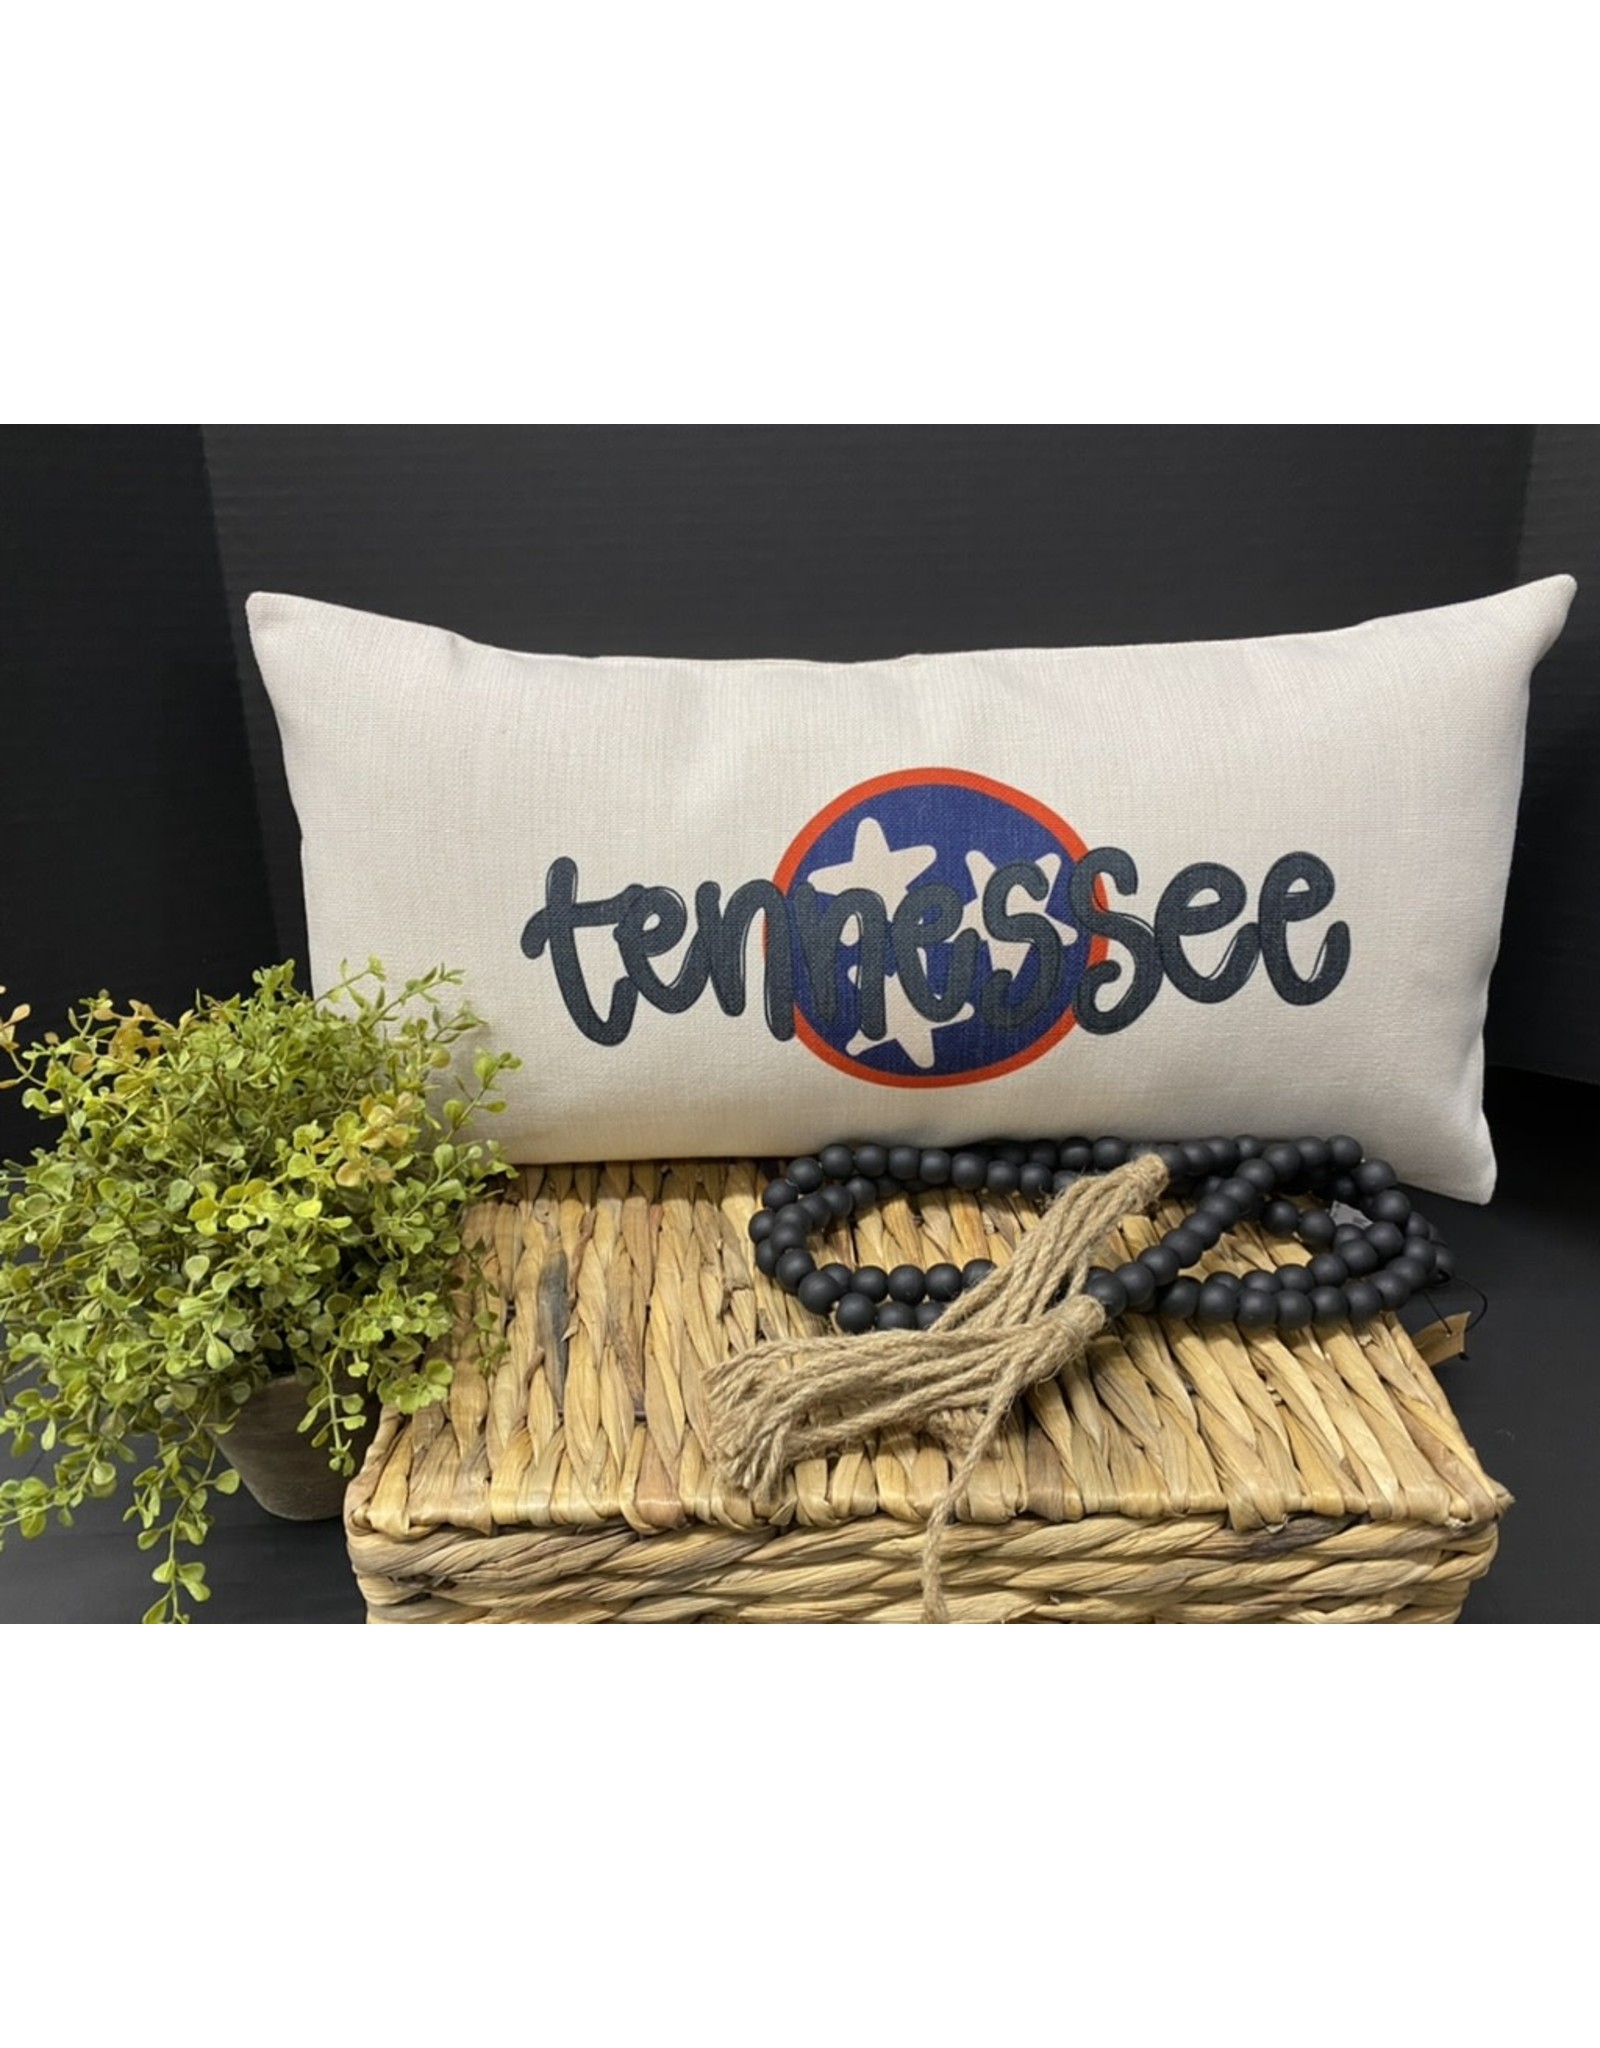 Doodles by Rebekah Tennessee Tri-Star Pillow